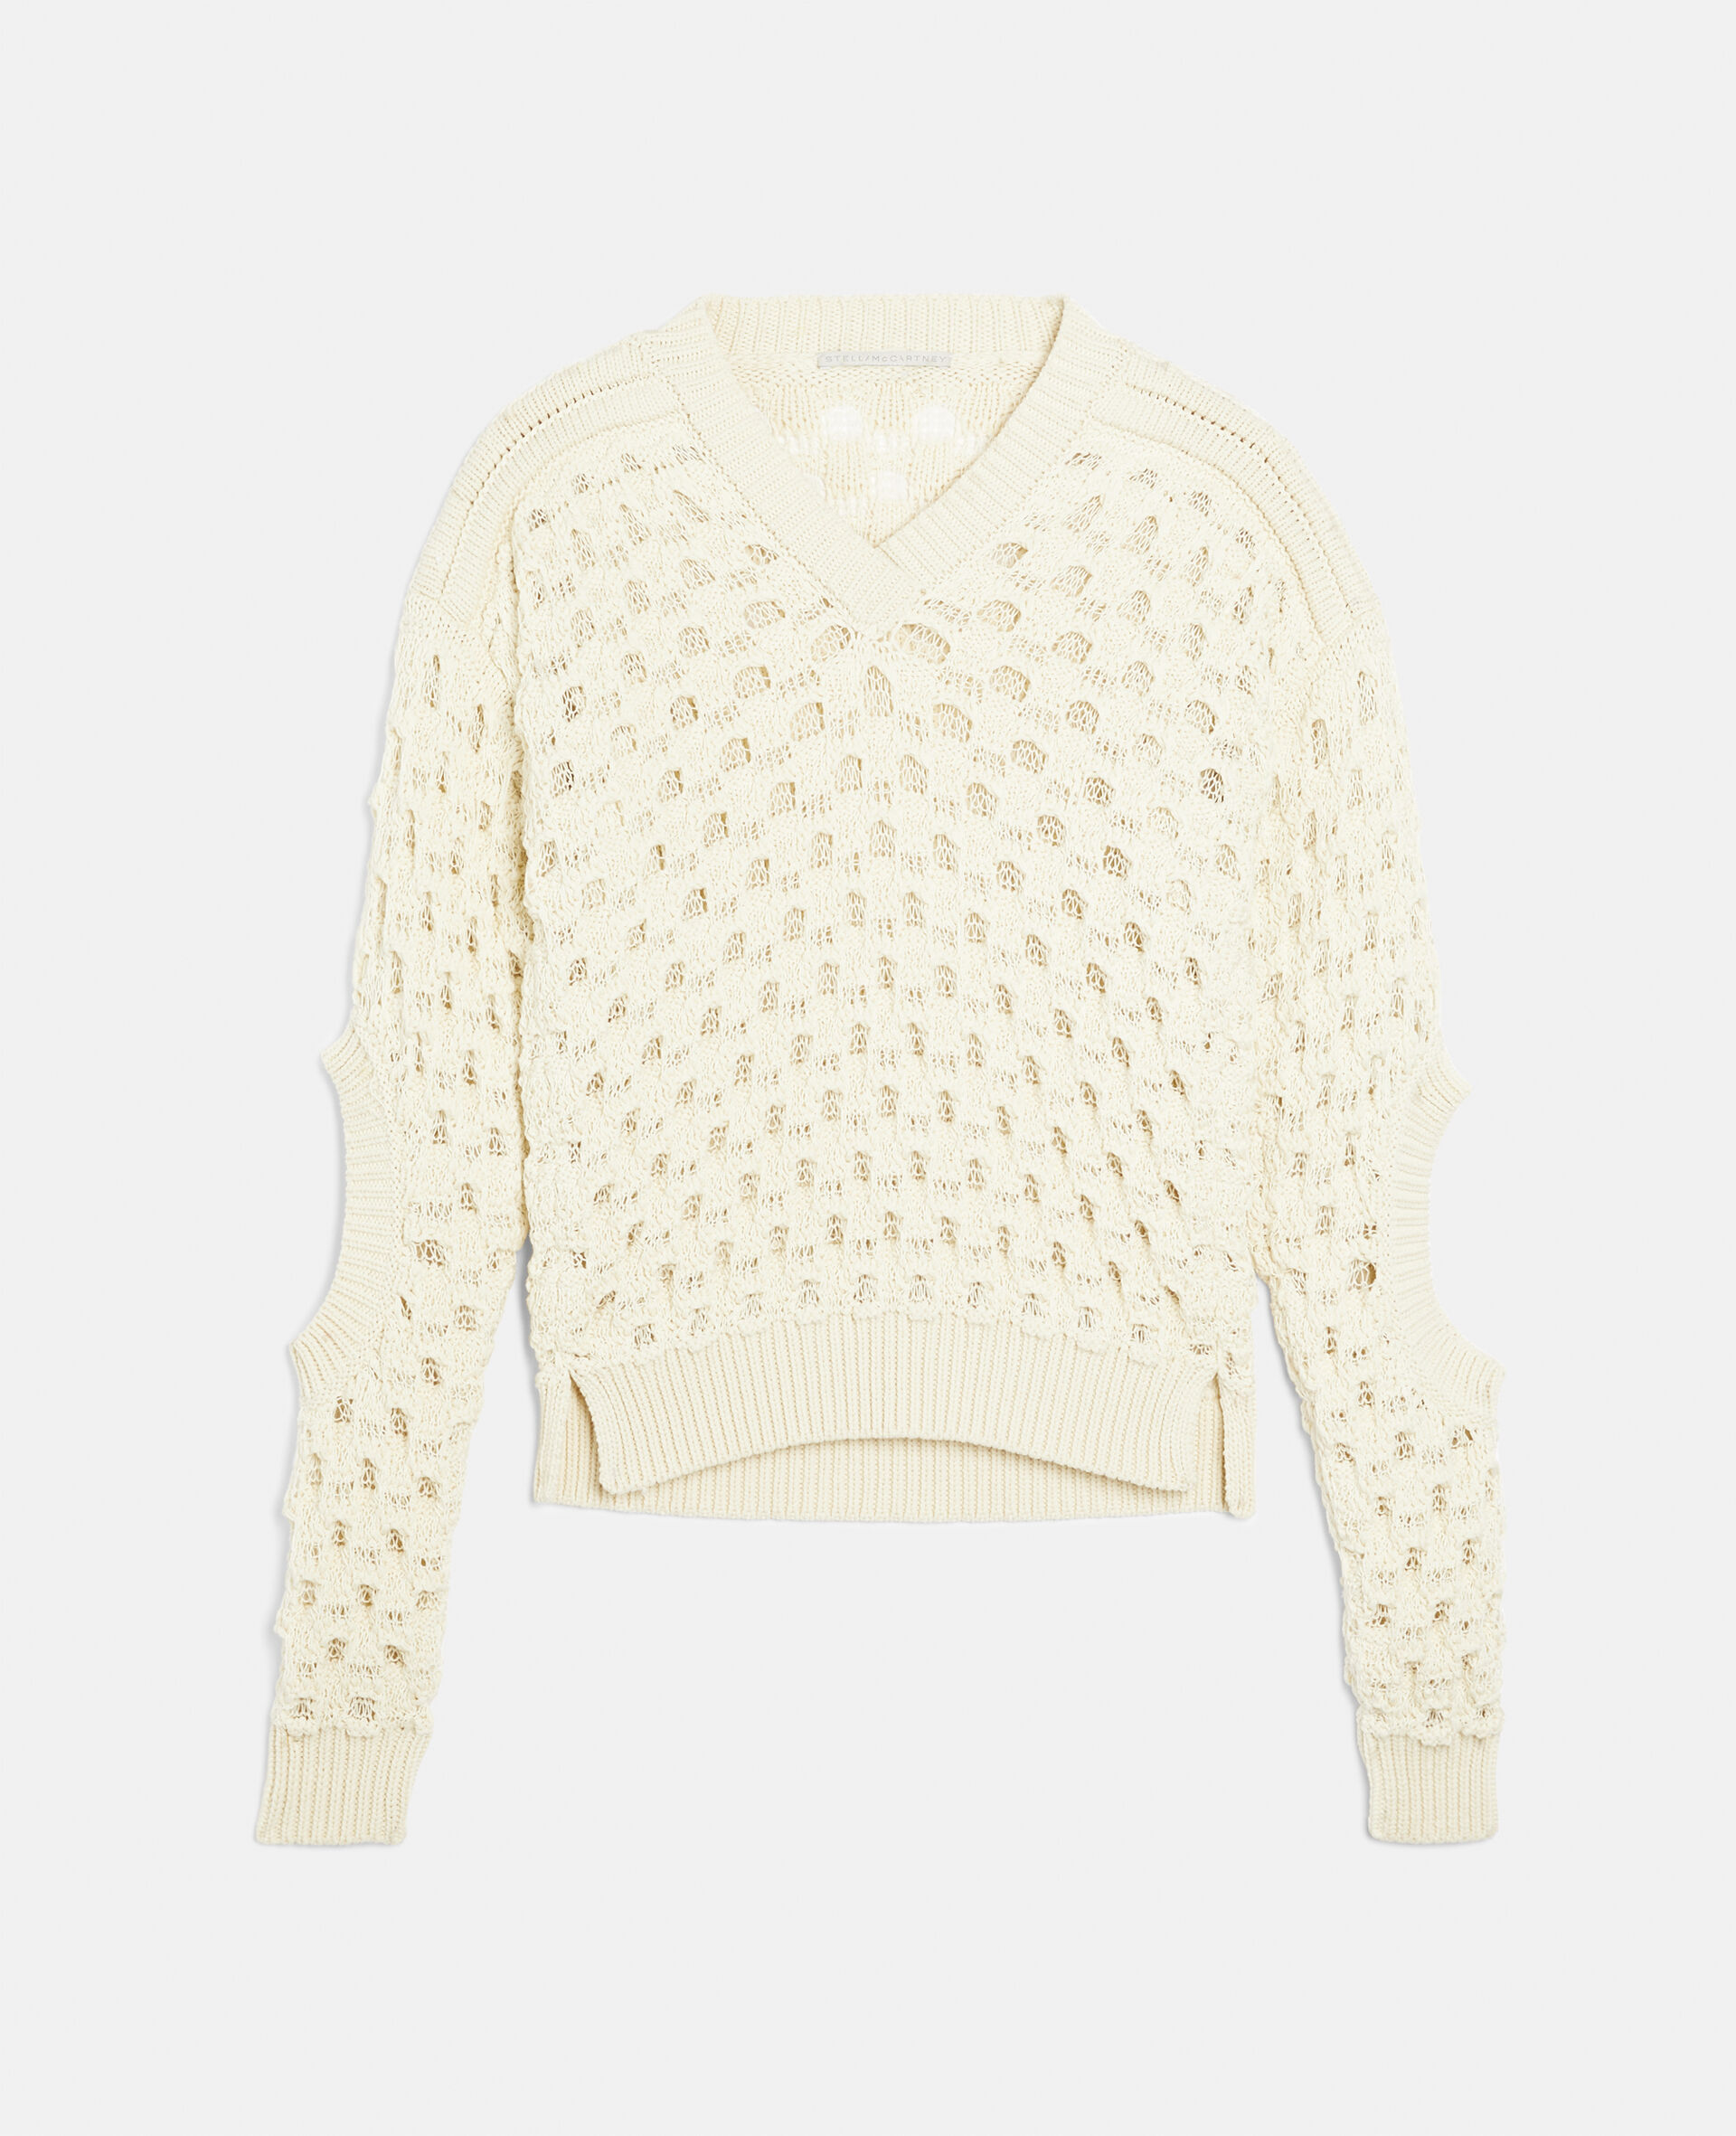 Textured Mesh Knit Sweater-White-large image number 0